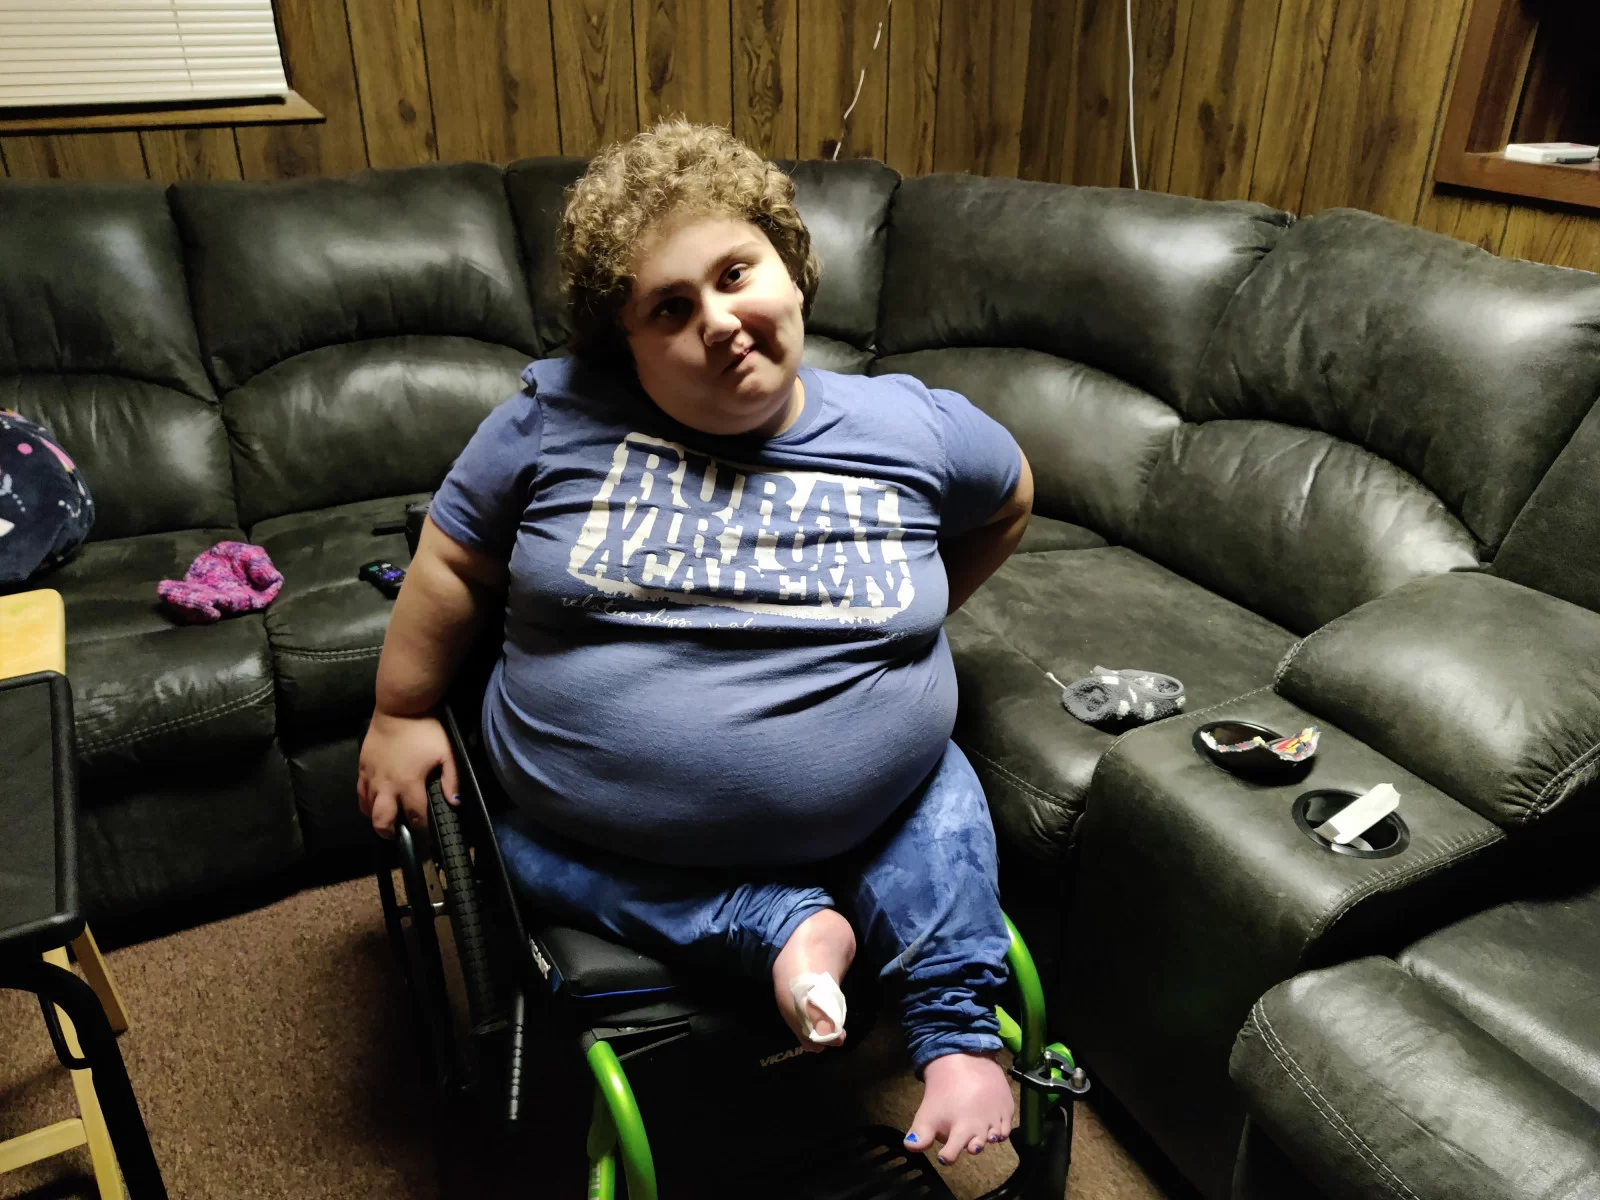 My tipped wheelchair